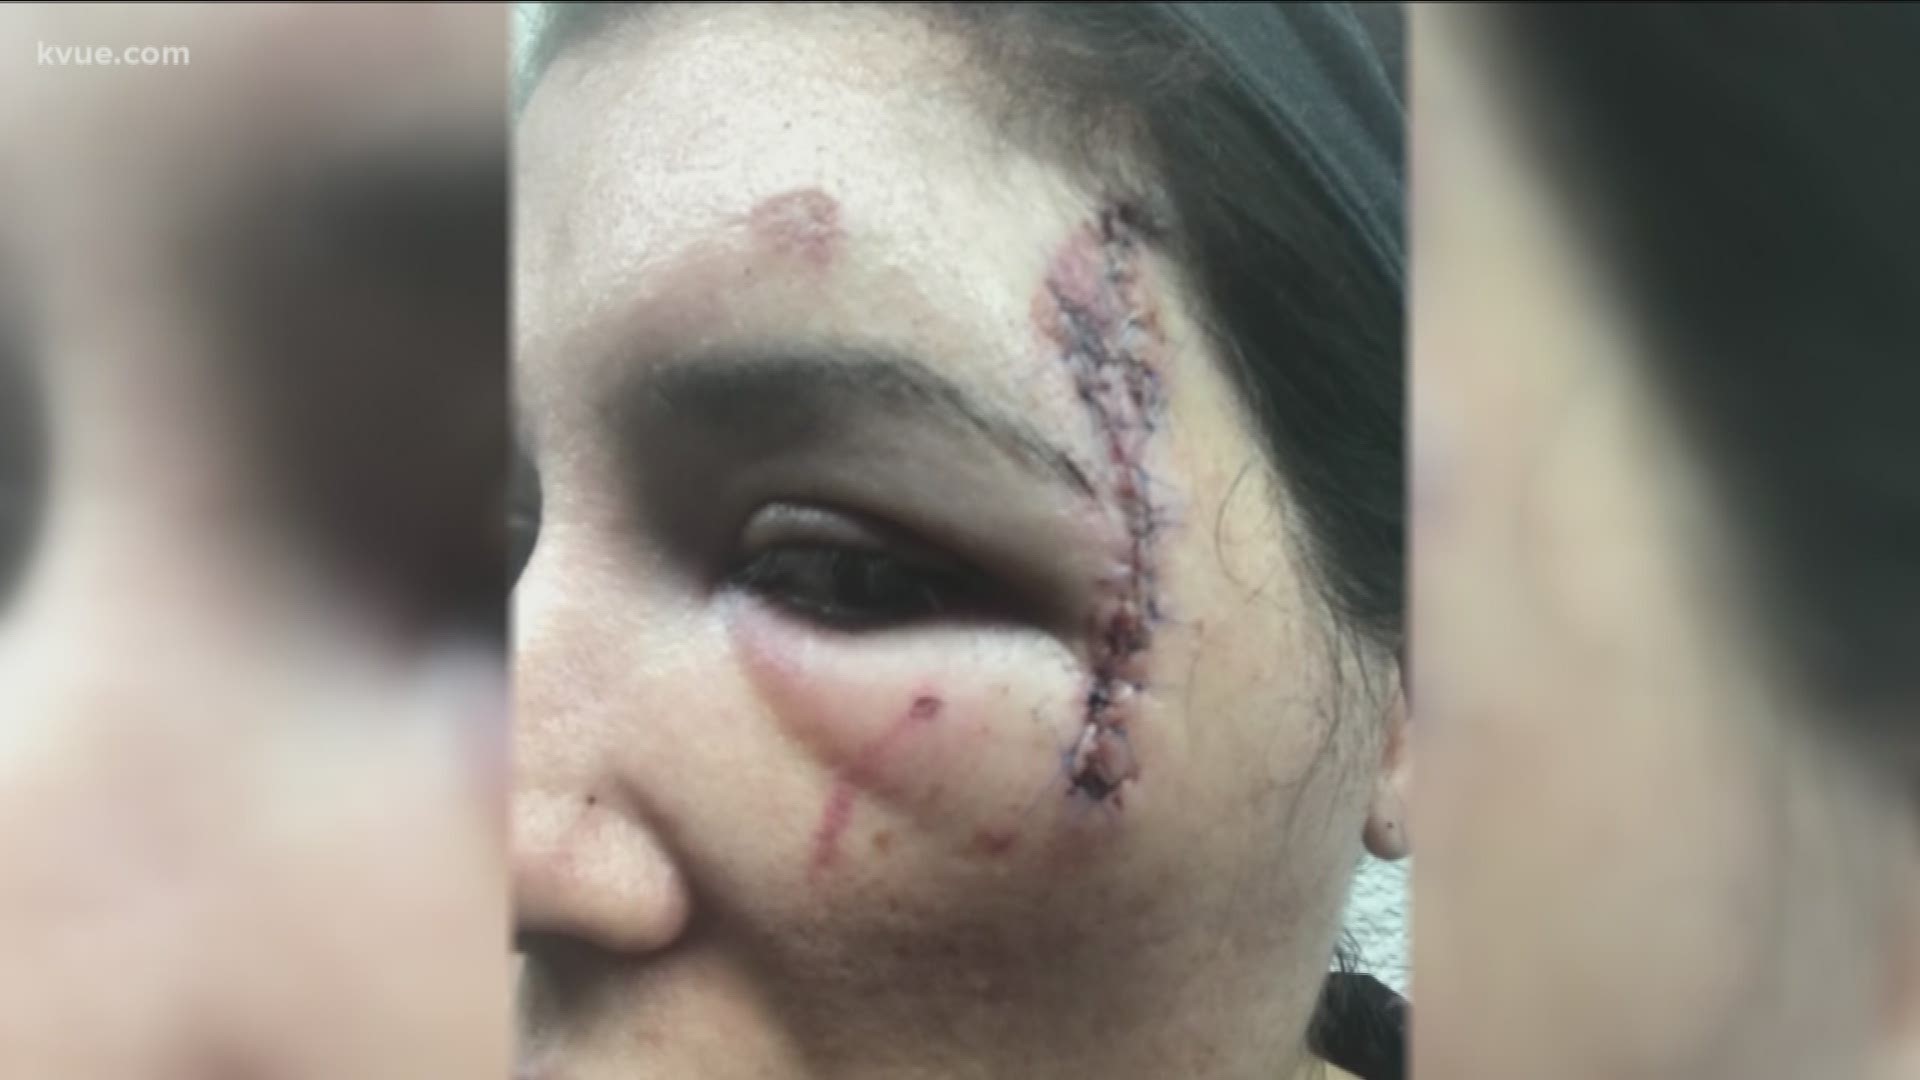 A woman is suing two Austin police officers after she said they threw her in their patrol car, causing her to cut her head.